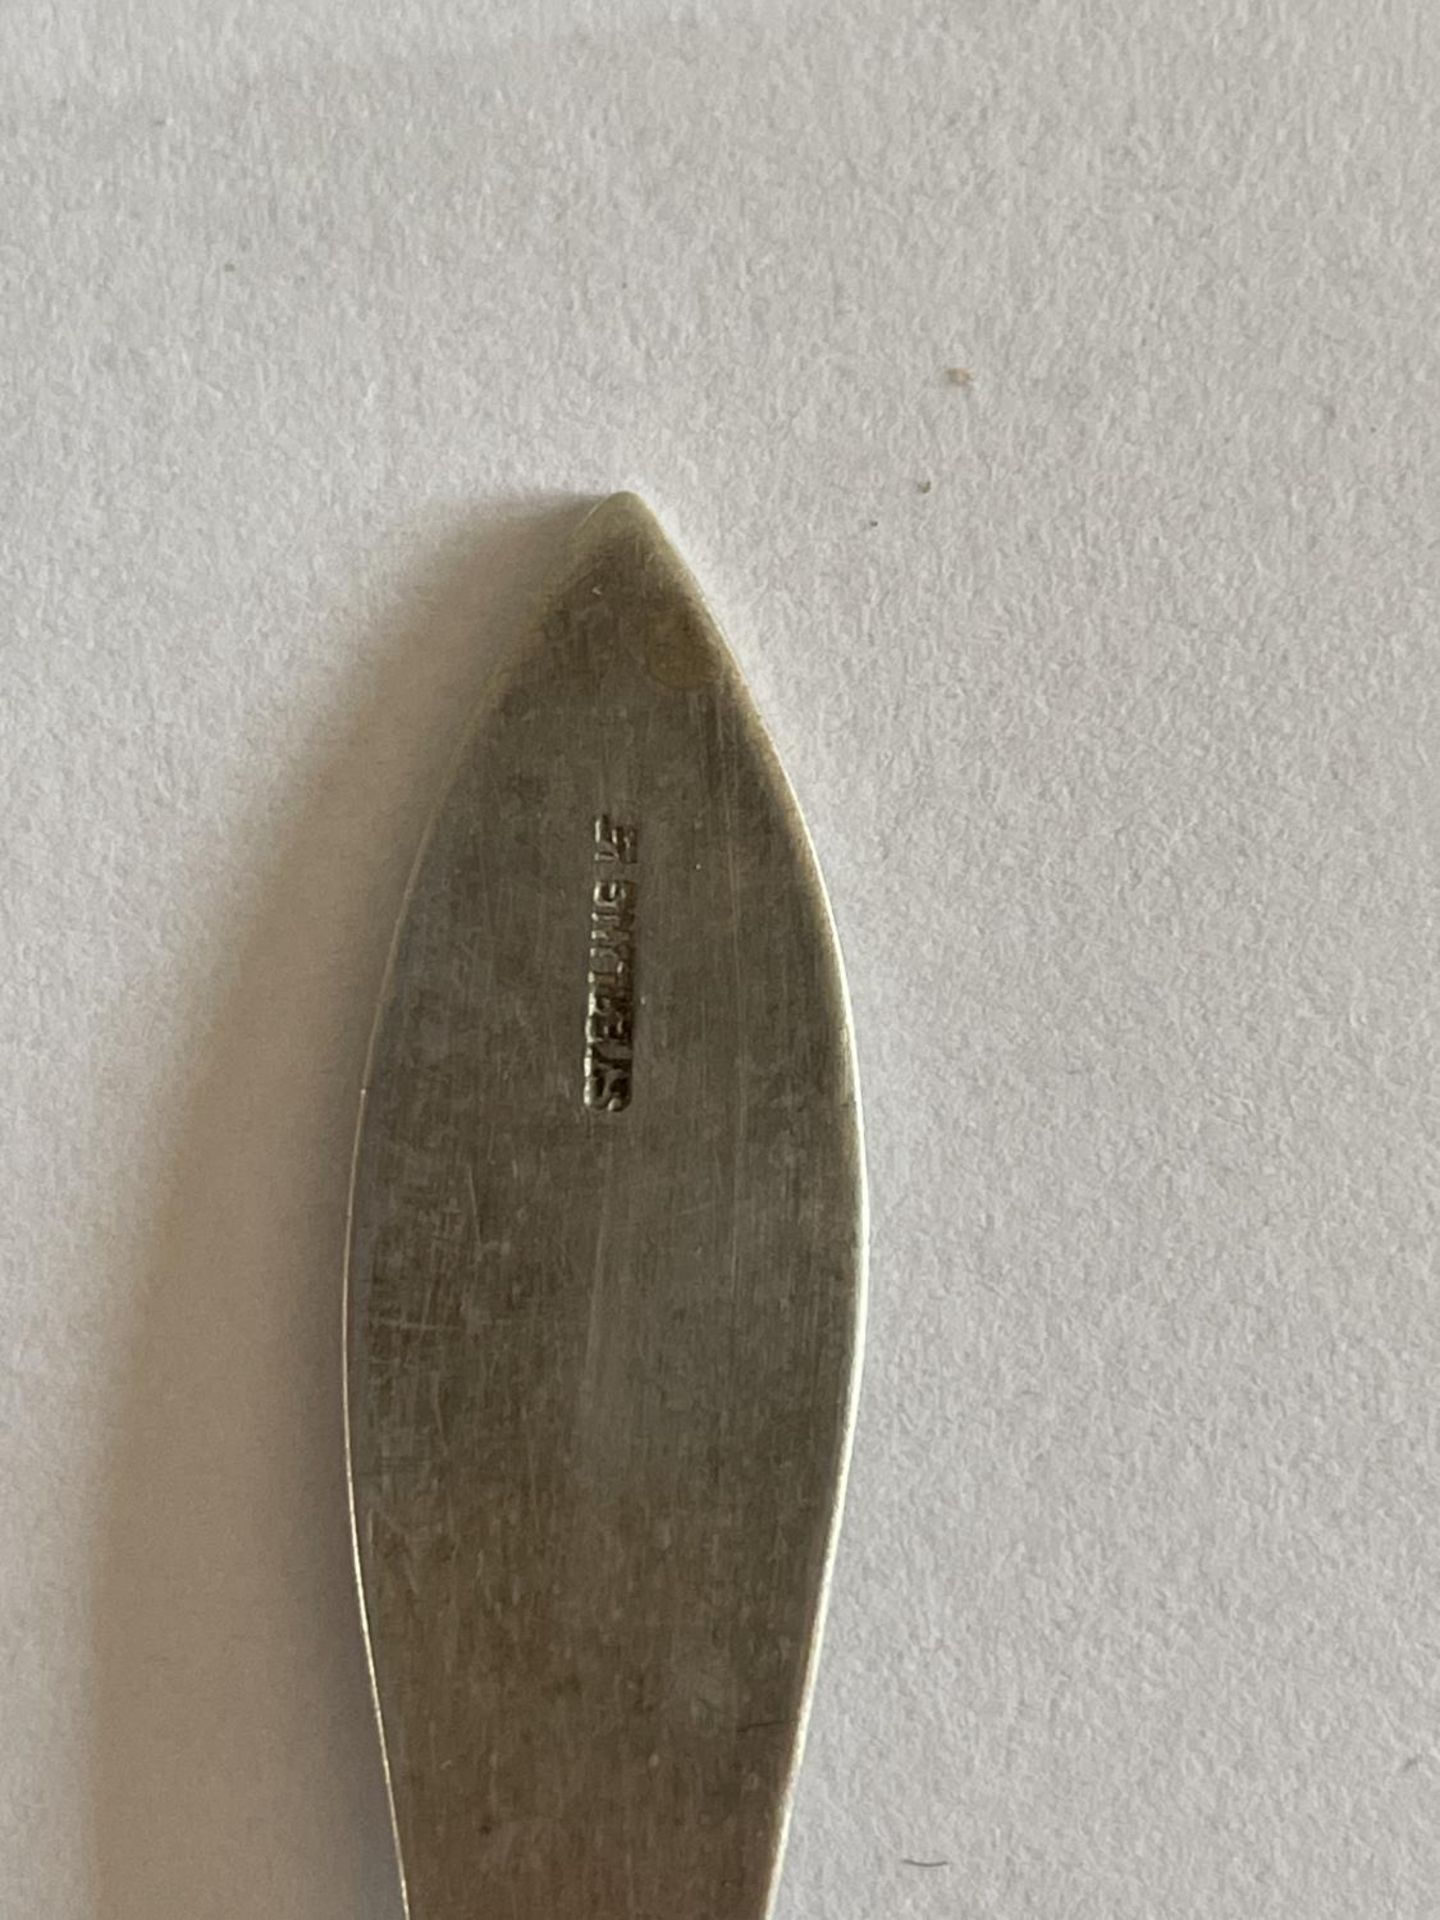 A HALLMARKED BIRMINGHAM SILVER NAPKIN RING AND A MARKED STERLING SPOON - Image 3 of 4